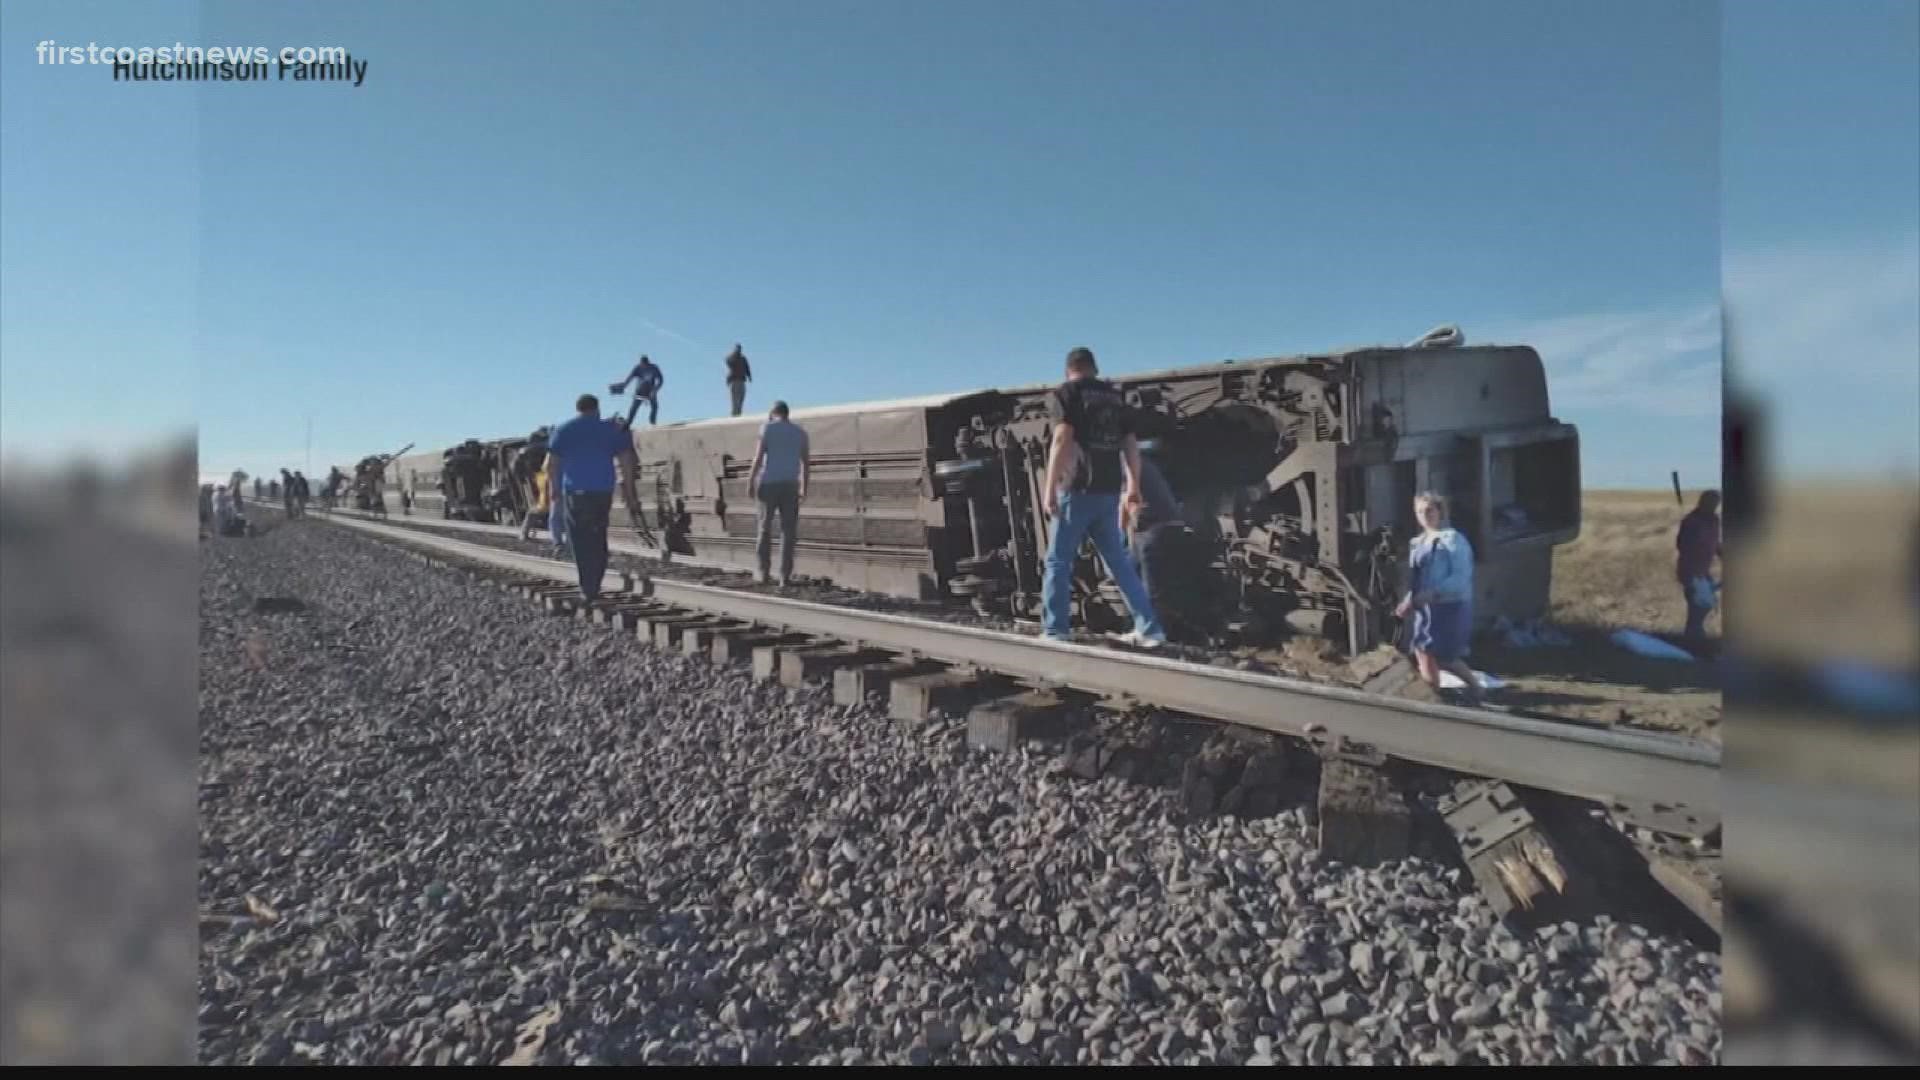 The train was carrying about 141 passengers and 16 crew members.